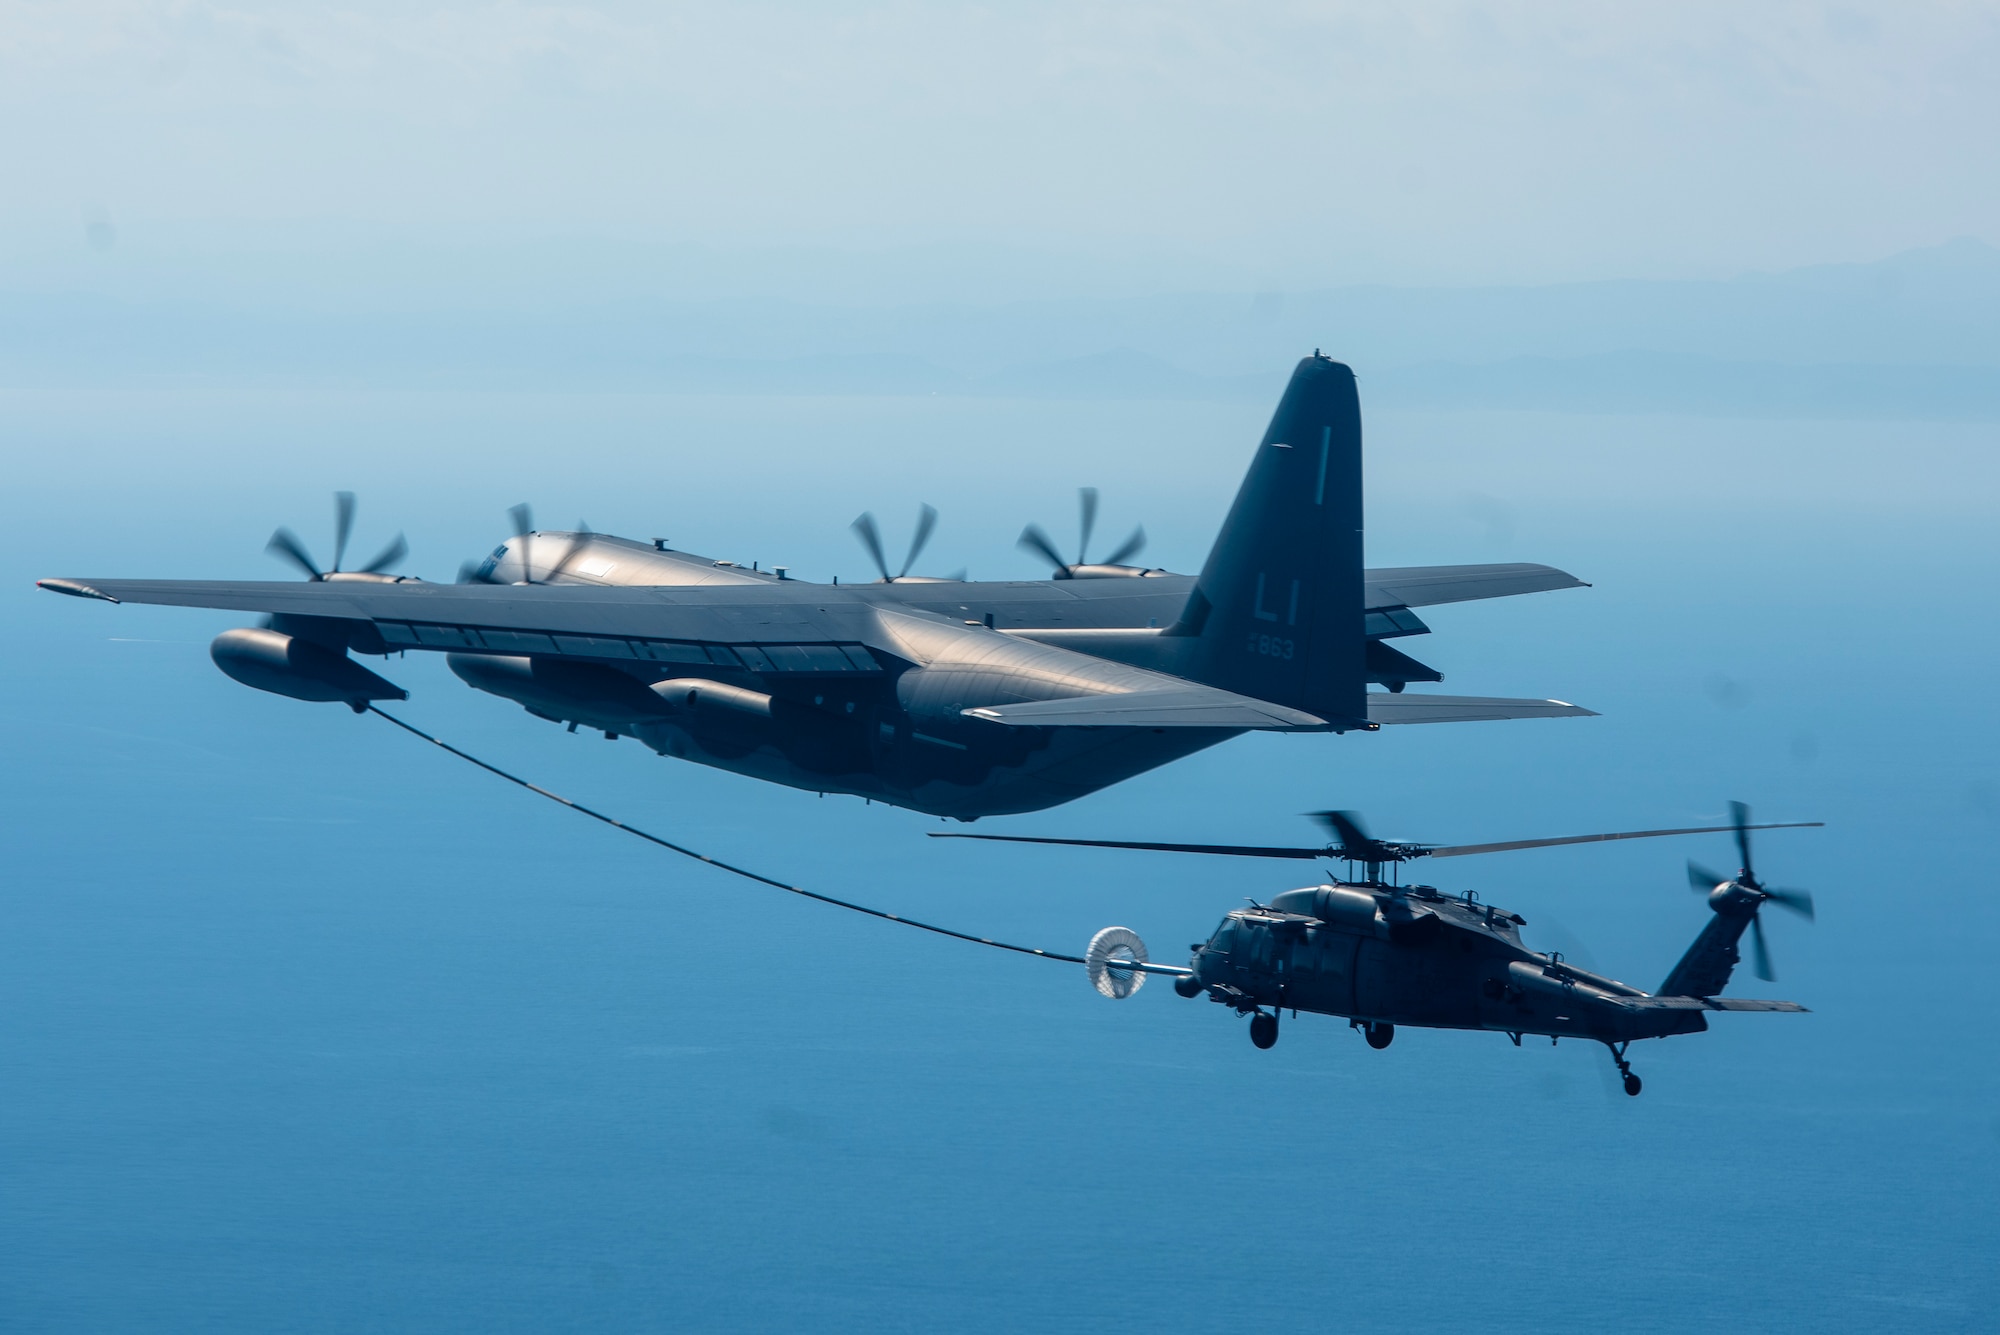 A KC-135 Stratotanker refuels an HH-60G Pave Hawk during a combat search and rescue training event